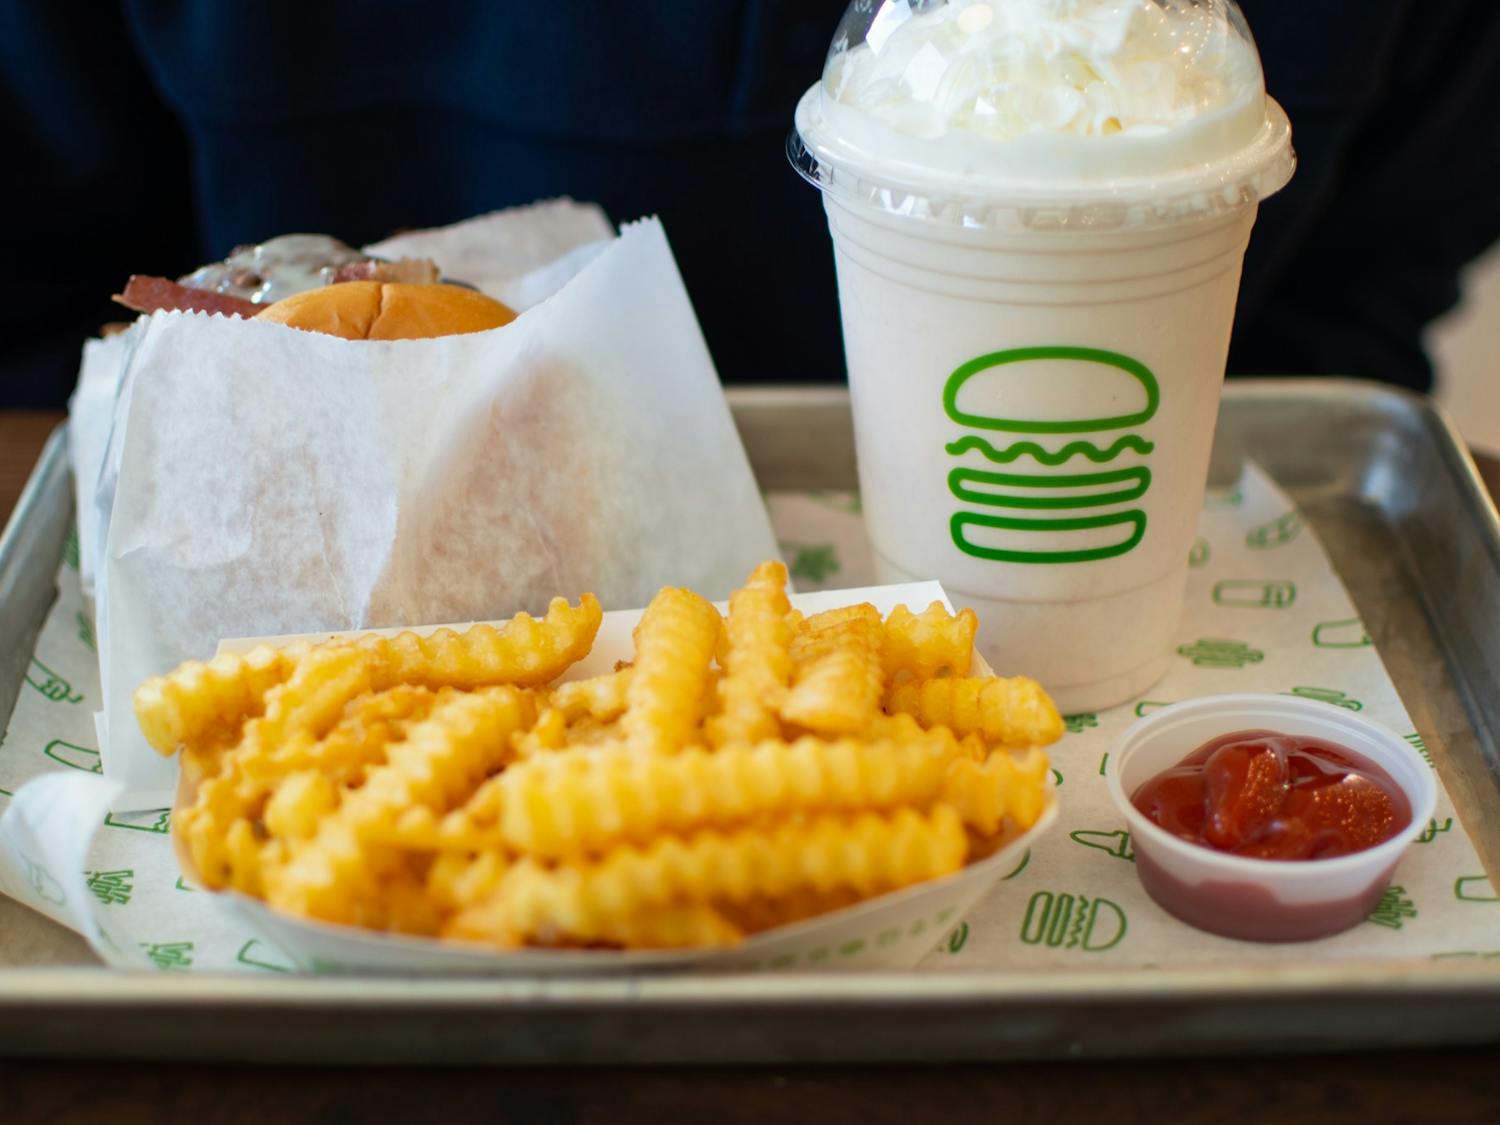 A meal at Shake Shack is pictured on Jan. 6, 2023. The new resturant is located in the Eastgate Crossing Shopping Center in Chapel Hill NC.